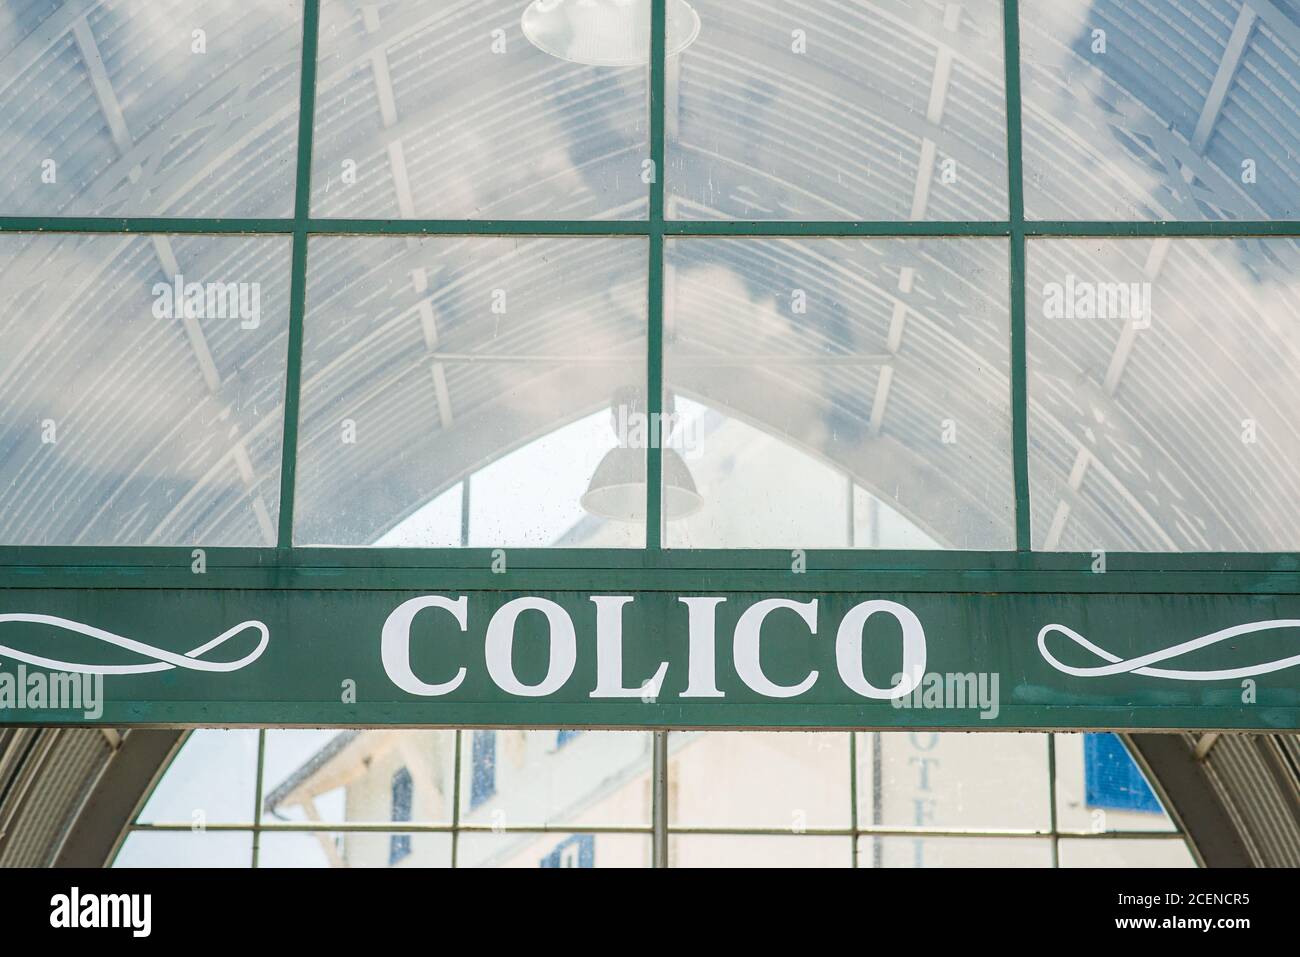 Colico. Lake Como. Italy - July 21, 2019: Ferry Pier in the Commune of Colico. Lombardy. Signboard with Name of the City. Stock Photo